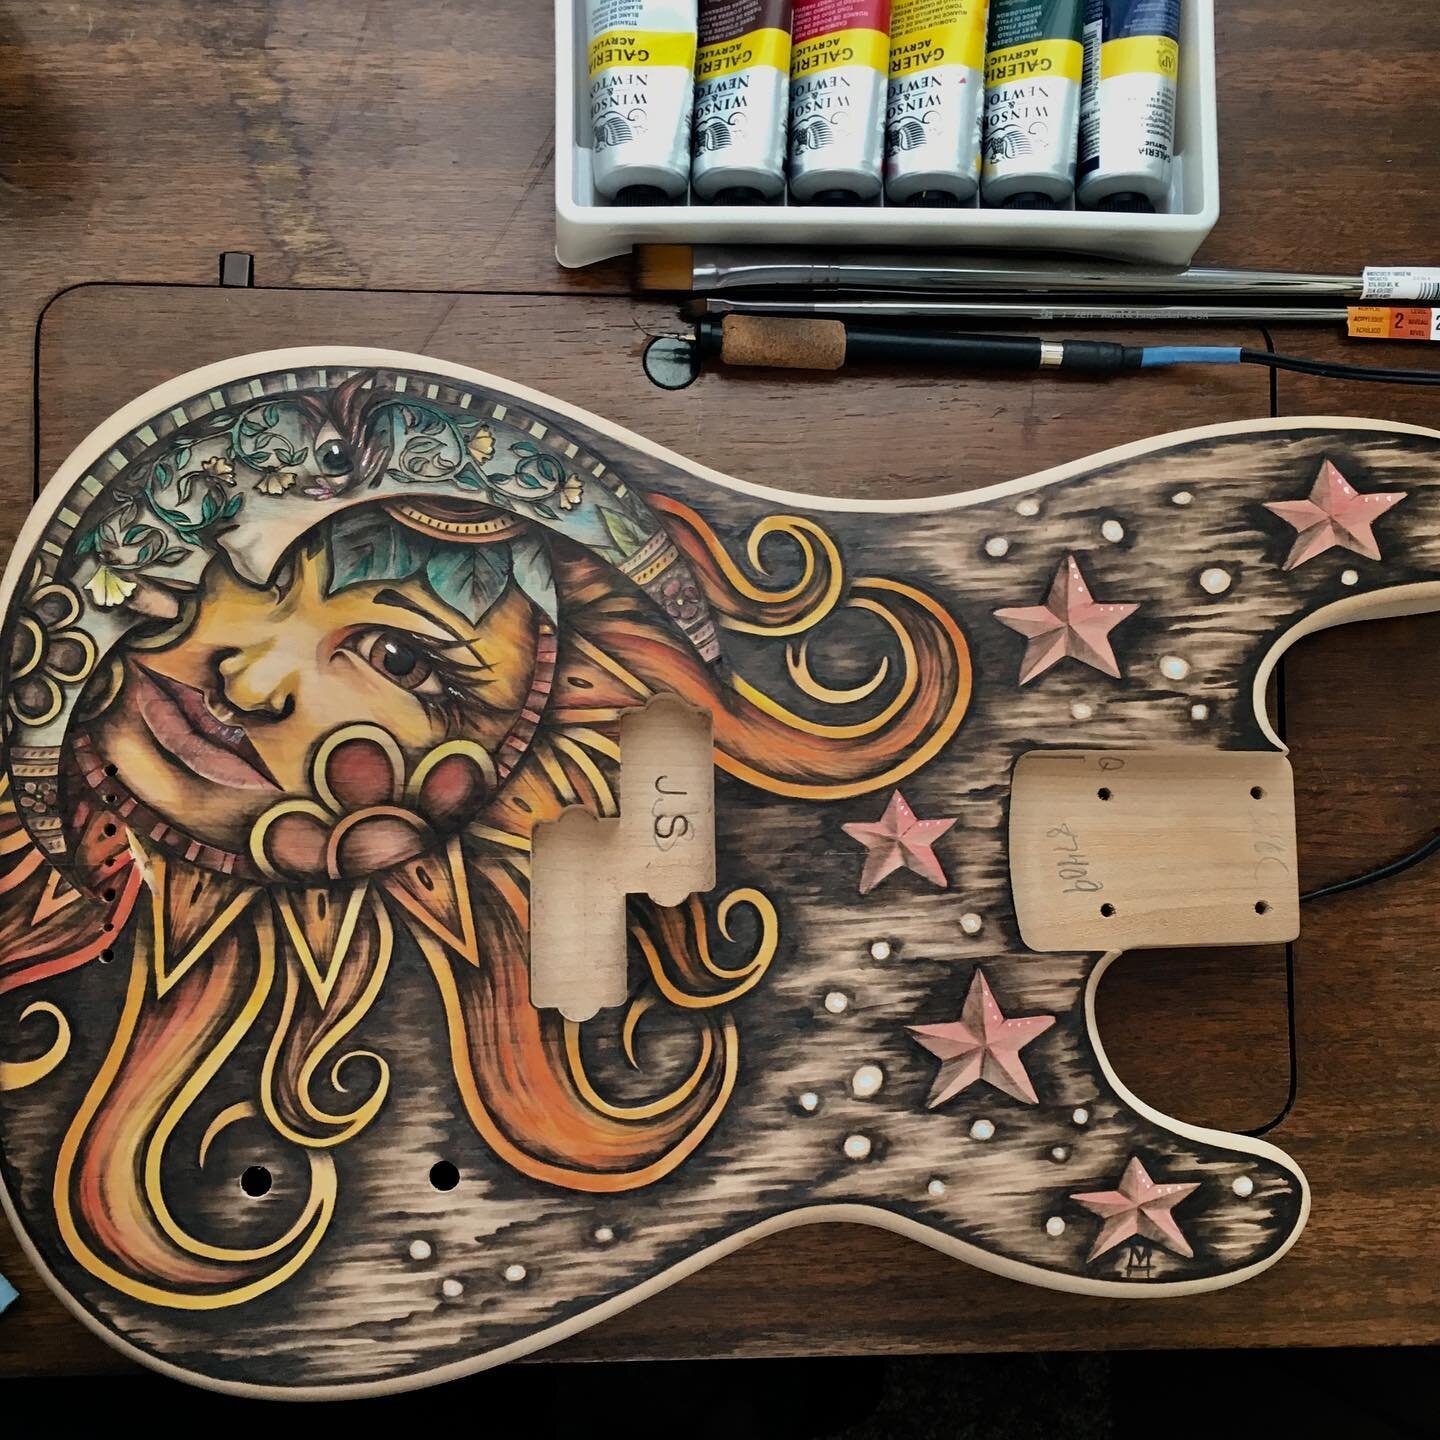 &quot;Luna Y Sol&quot;
Pyrography + Watercolor on alder 

Collaboration with Fender Masterbuilder Jason Smith

This is a throwback to 2018, and the first instrument I worked on for @fendercustomshop 

It was an amazing experience to work with @jsmith